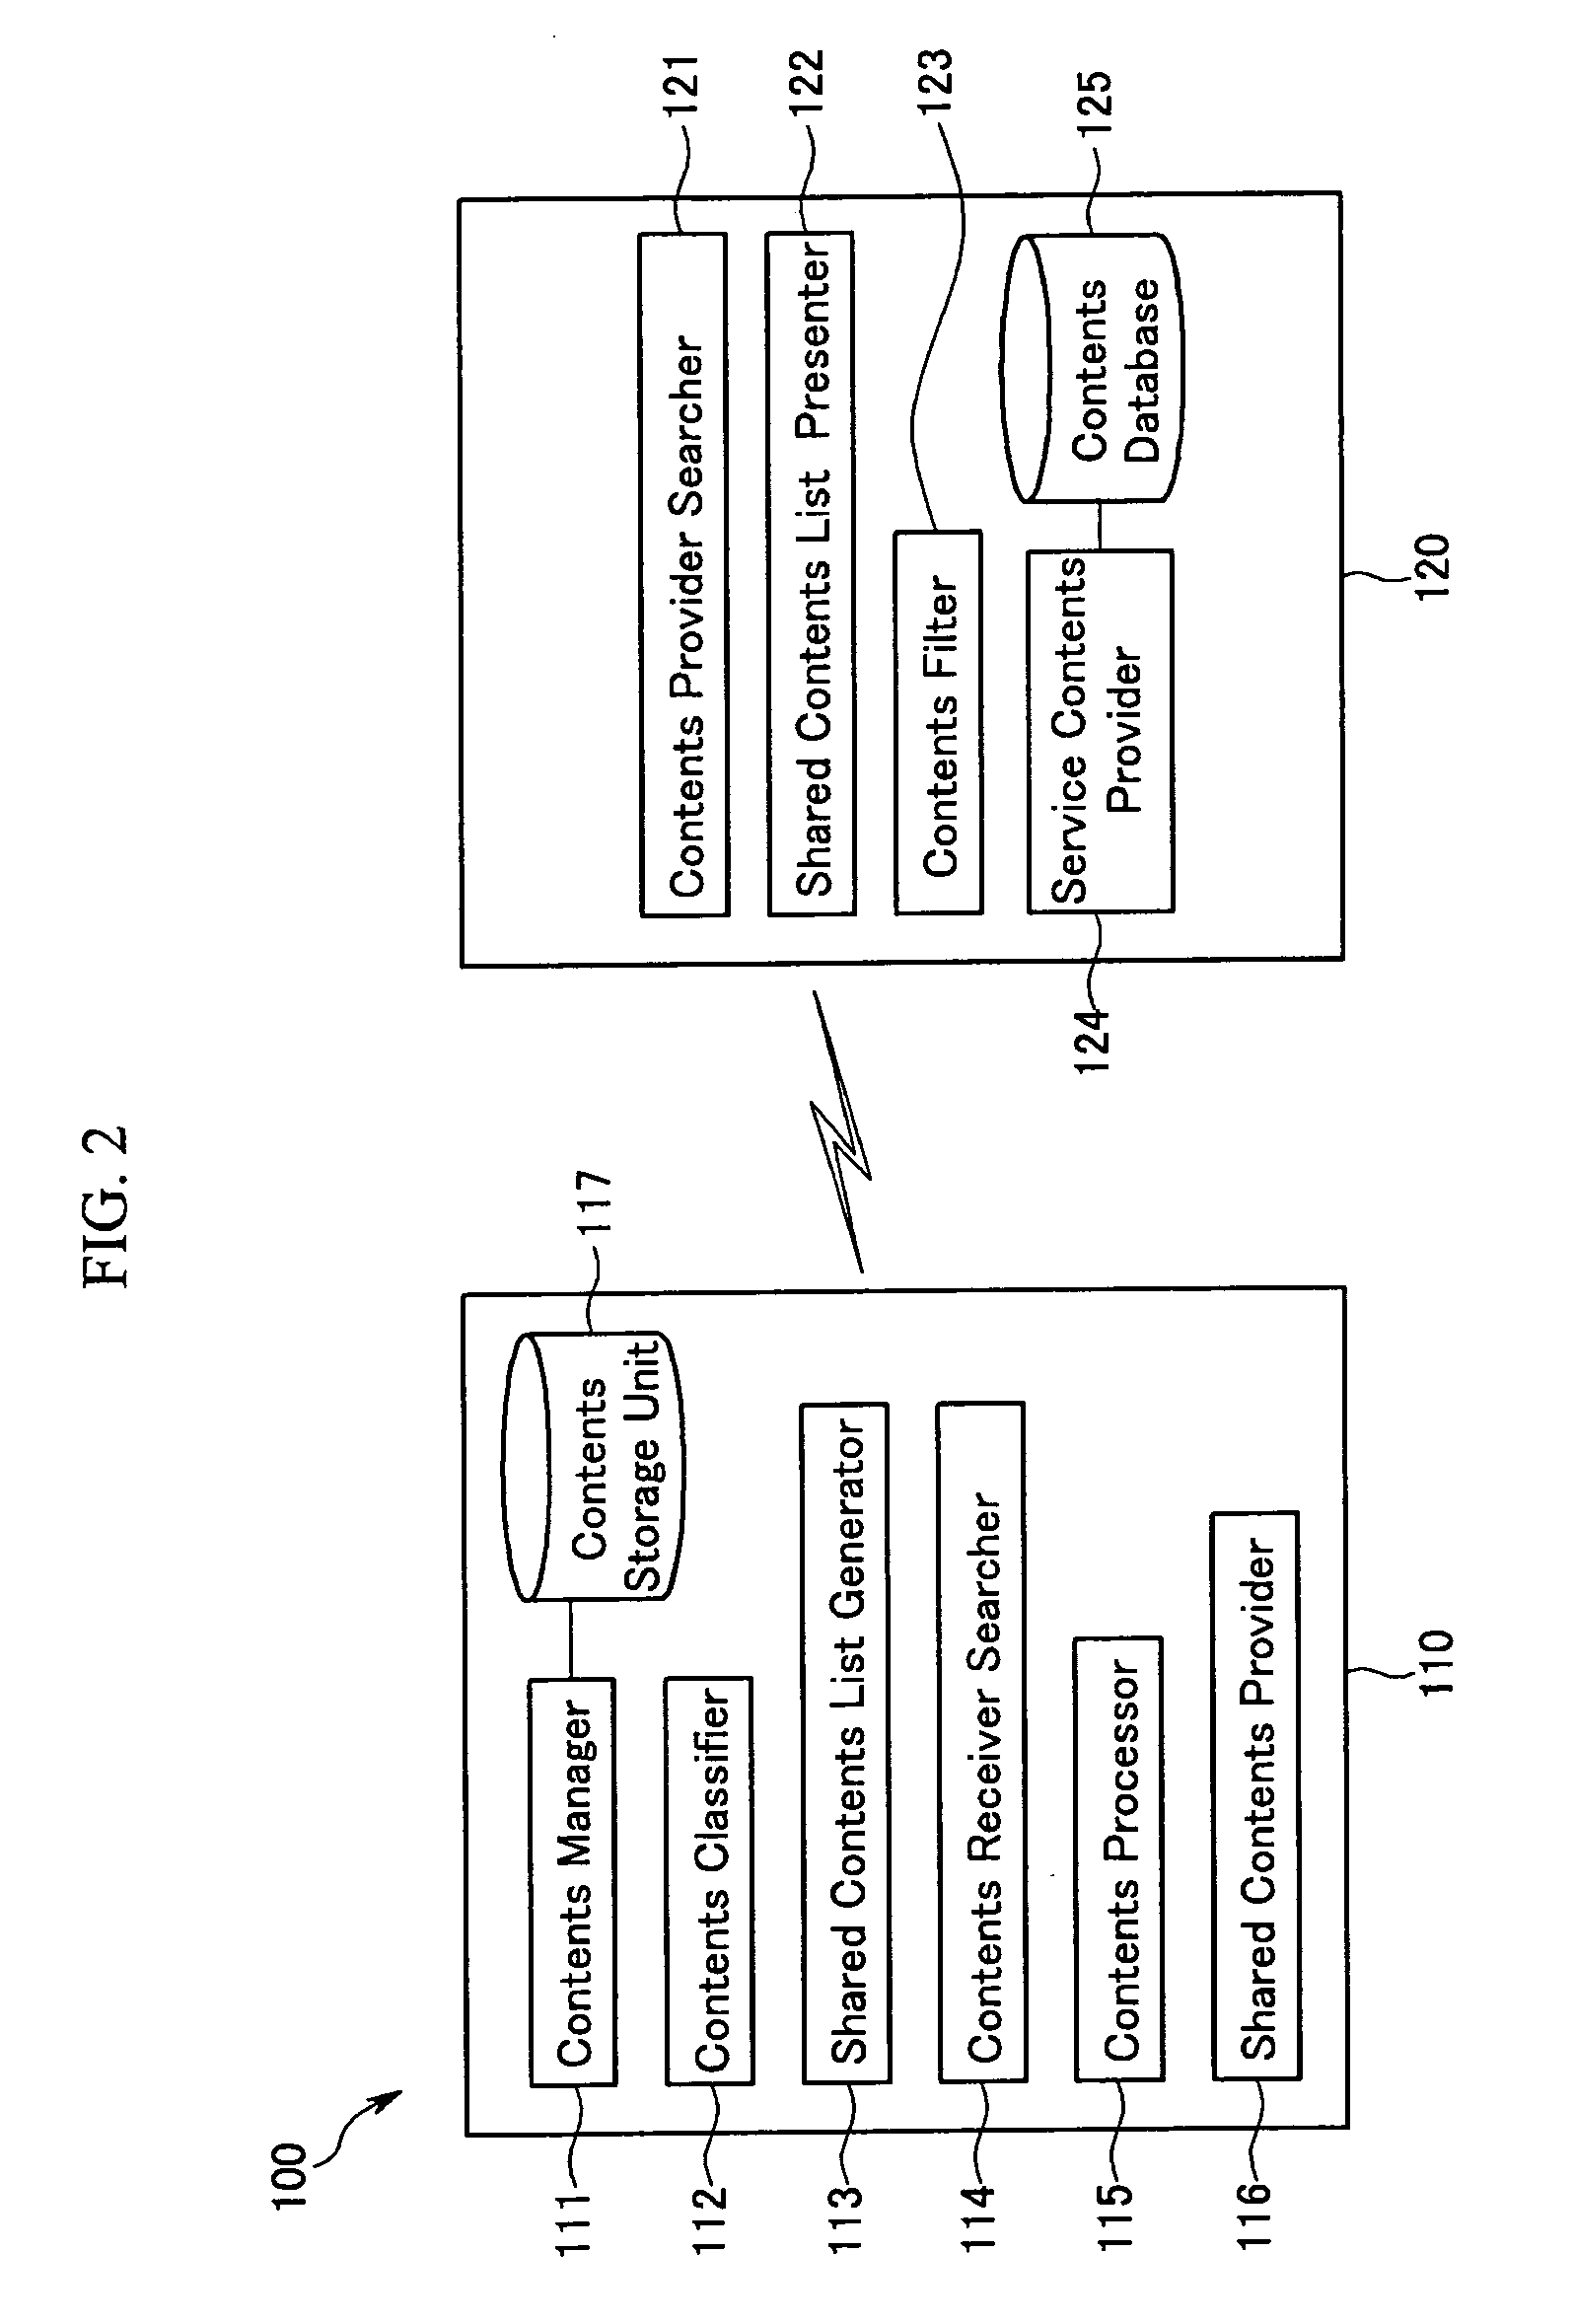 Apparatus and method for providing contents sharing service on network